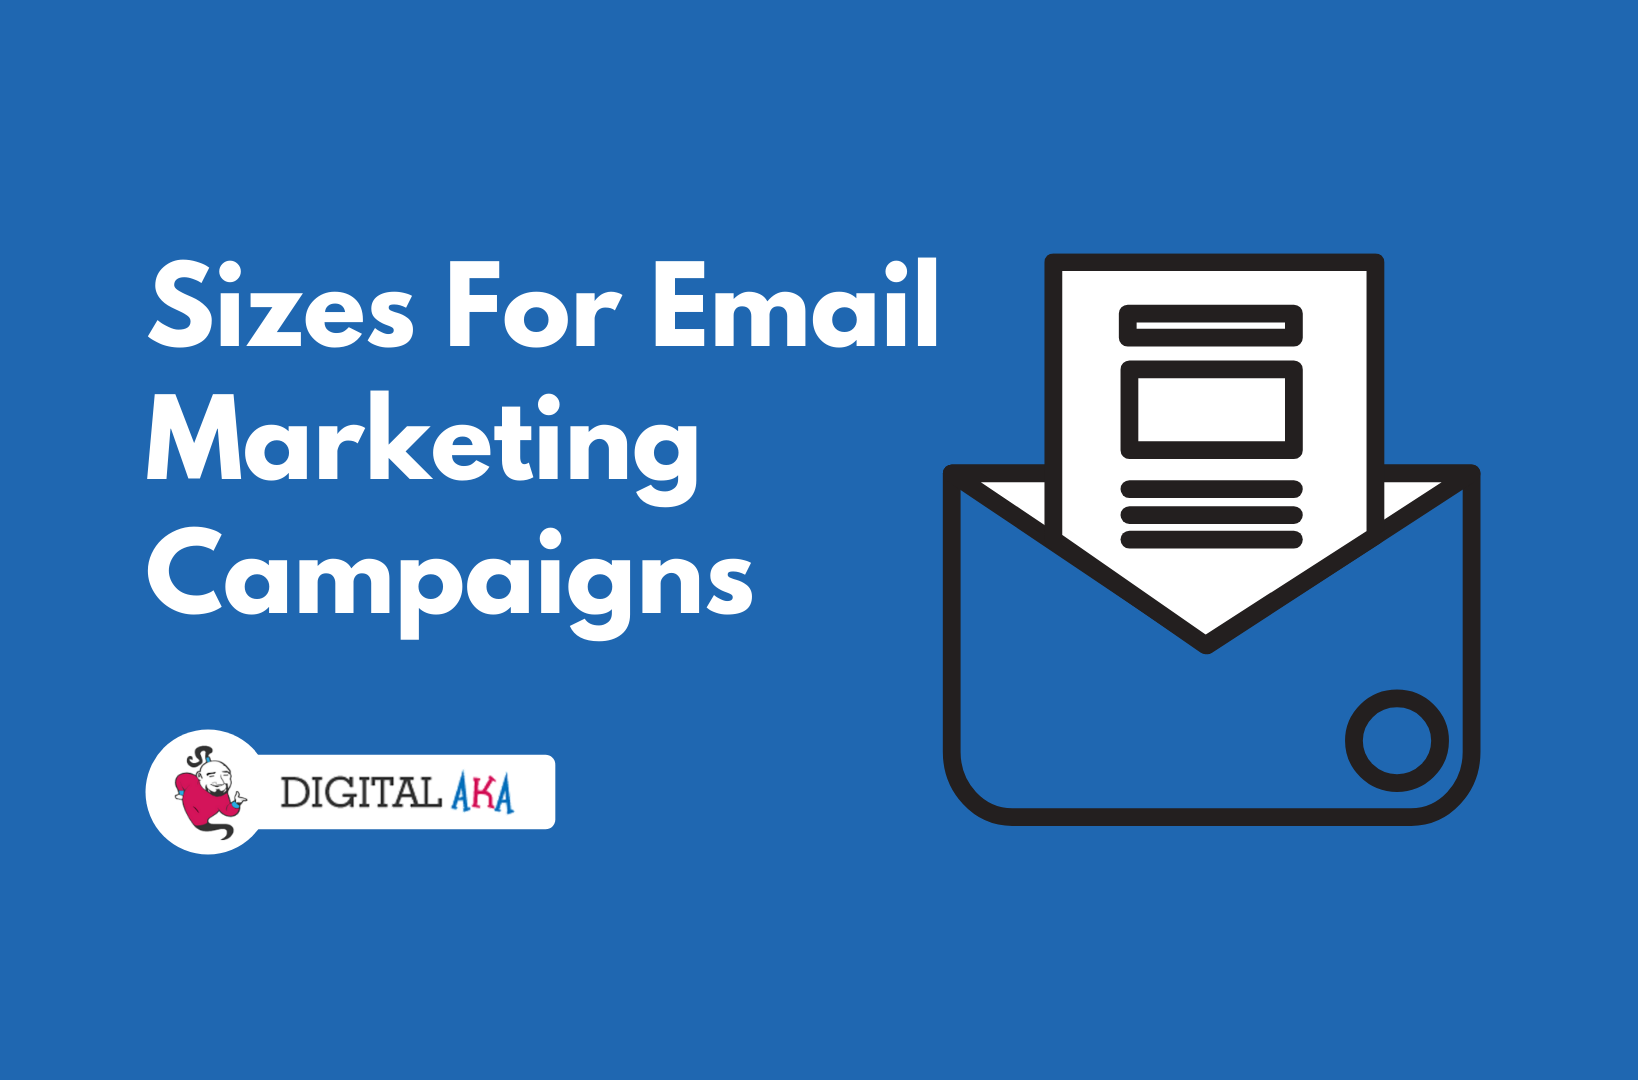 Sizes-for-email-marketing-campaigns